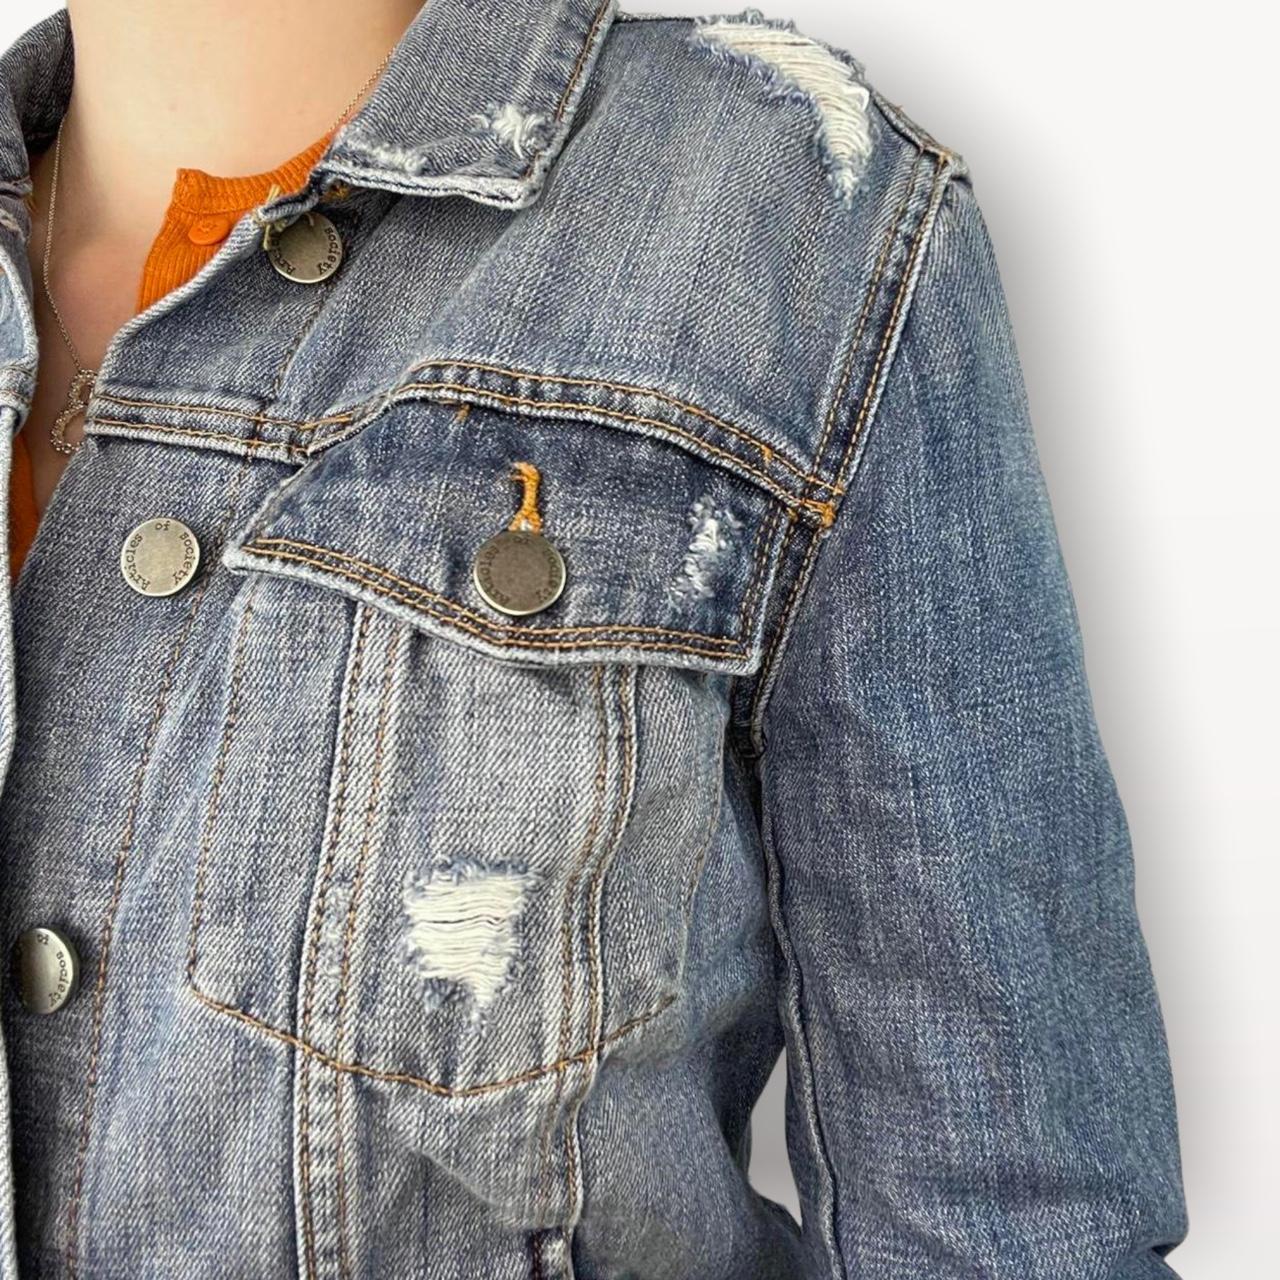 Product Image 4 - Distressed button up jean jacket